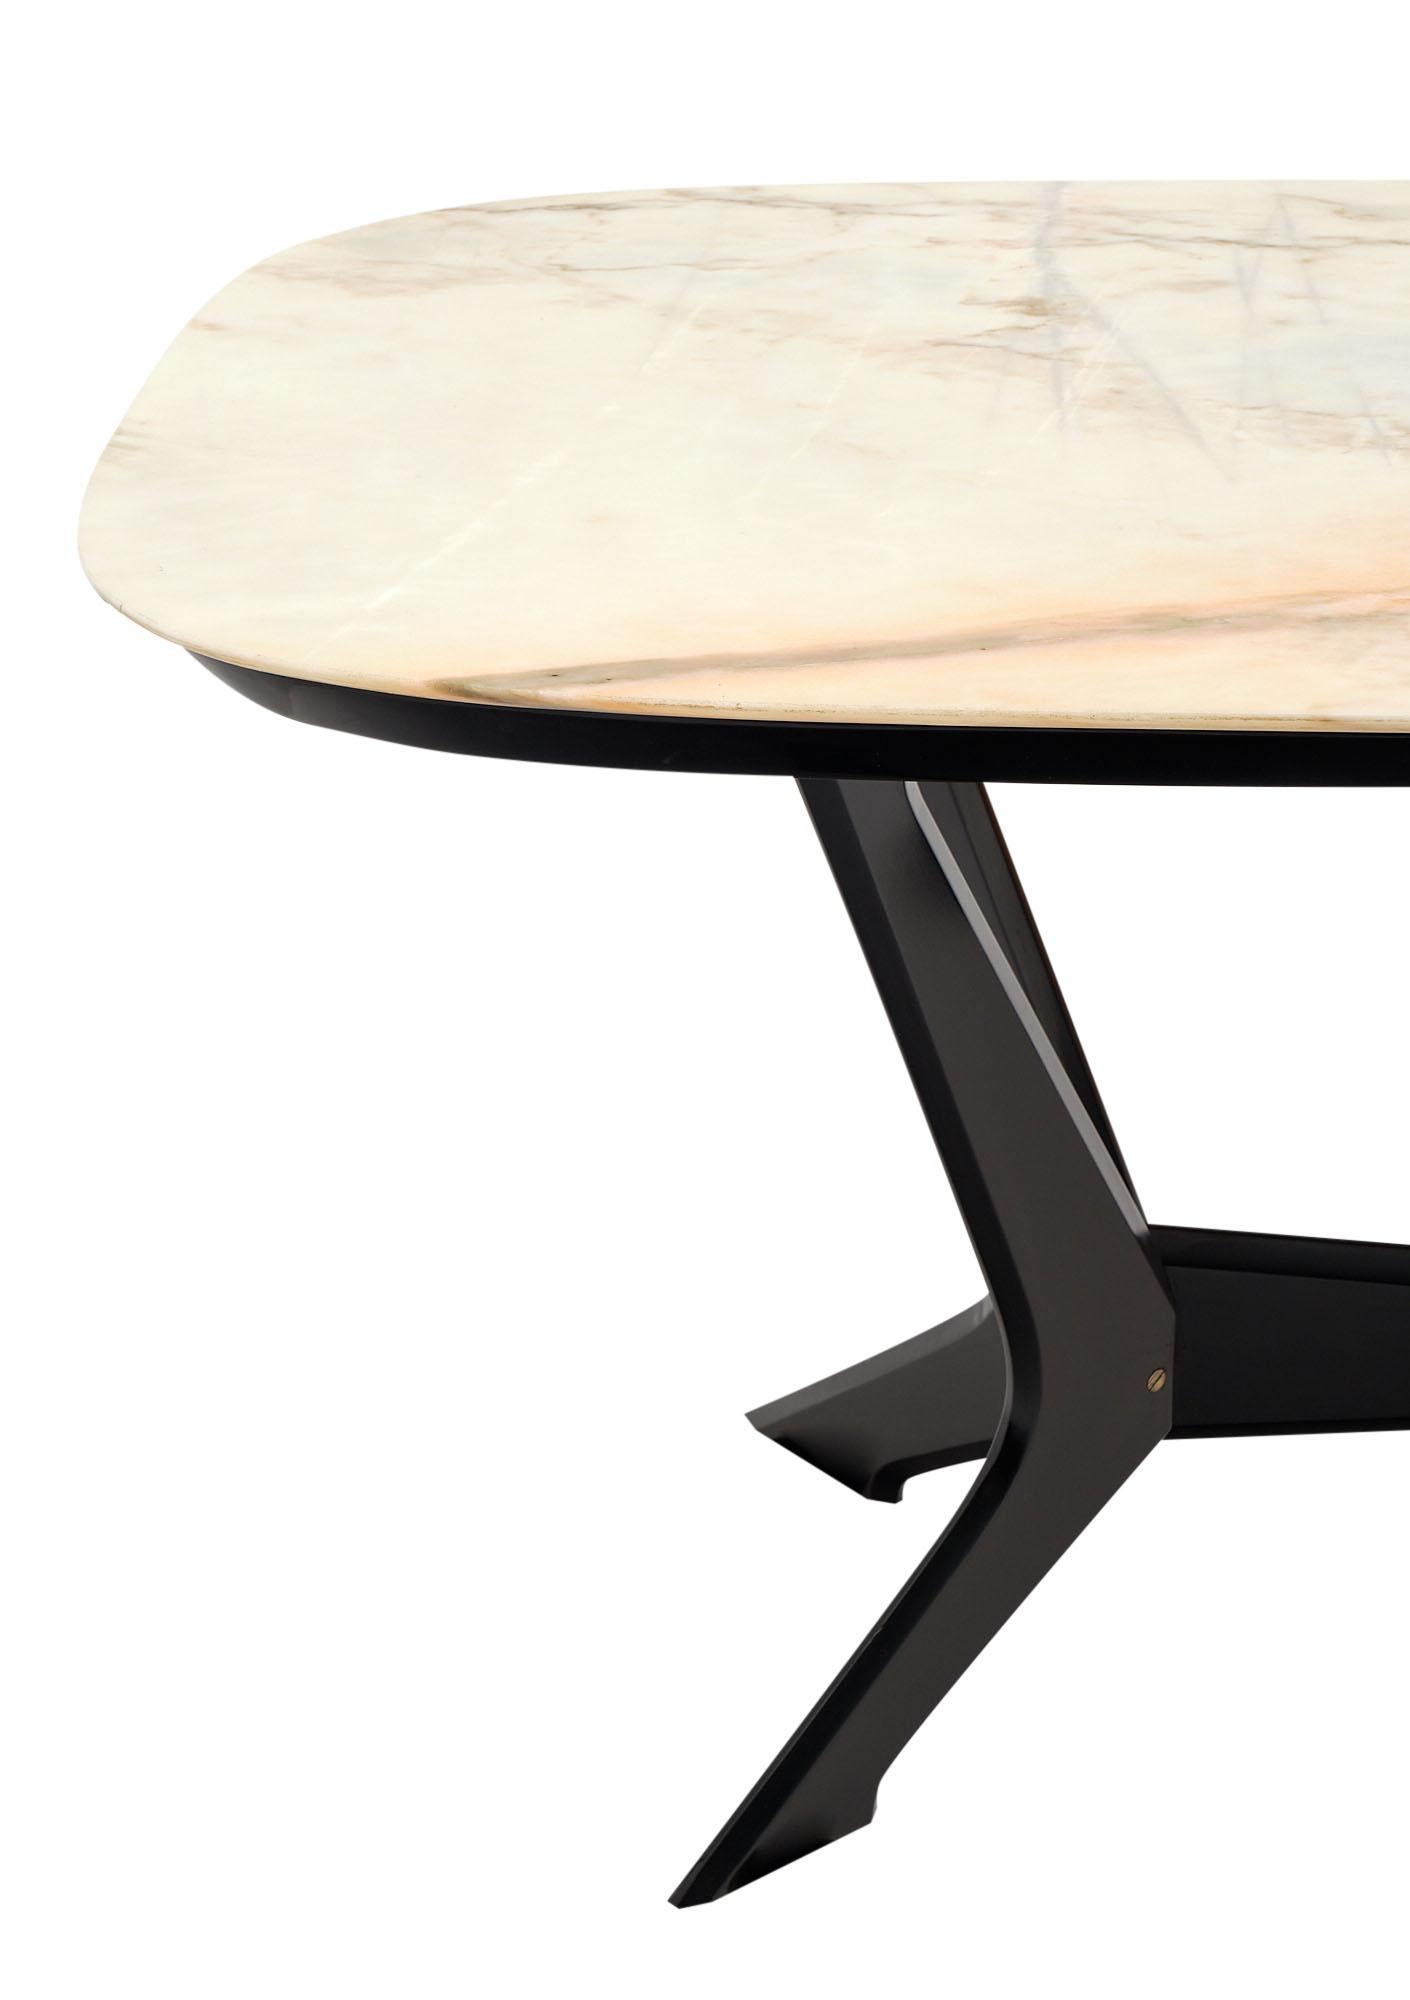 Marble Italian Modernist Dining Table Attributed to Ico Parisi For Sale